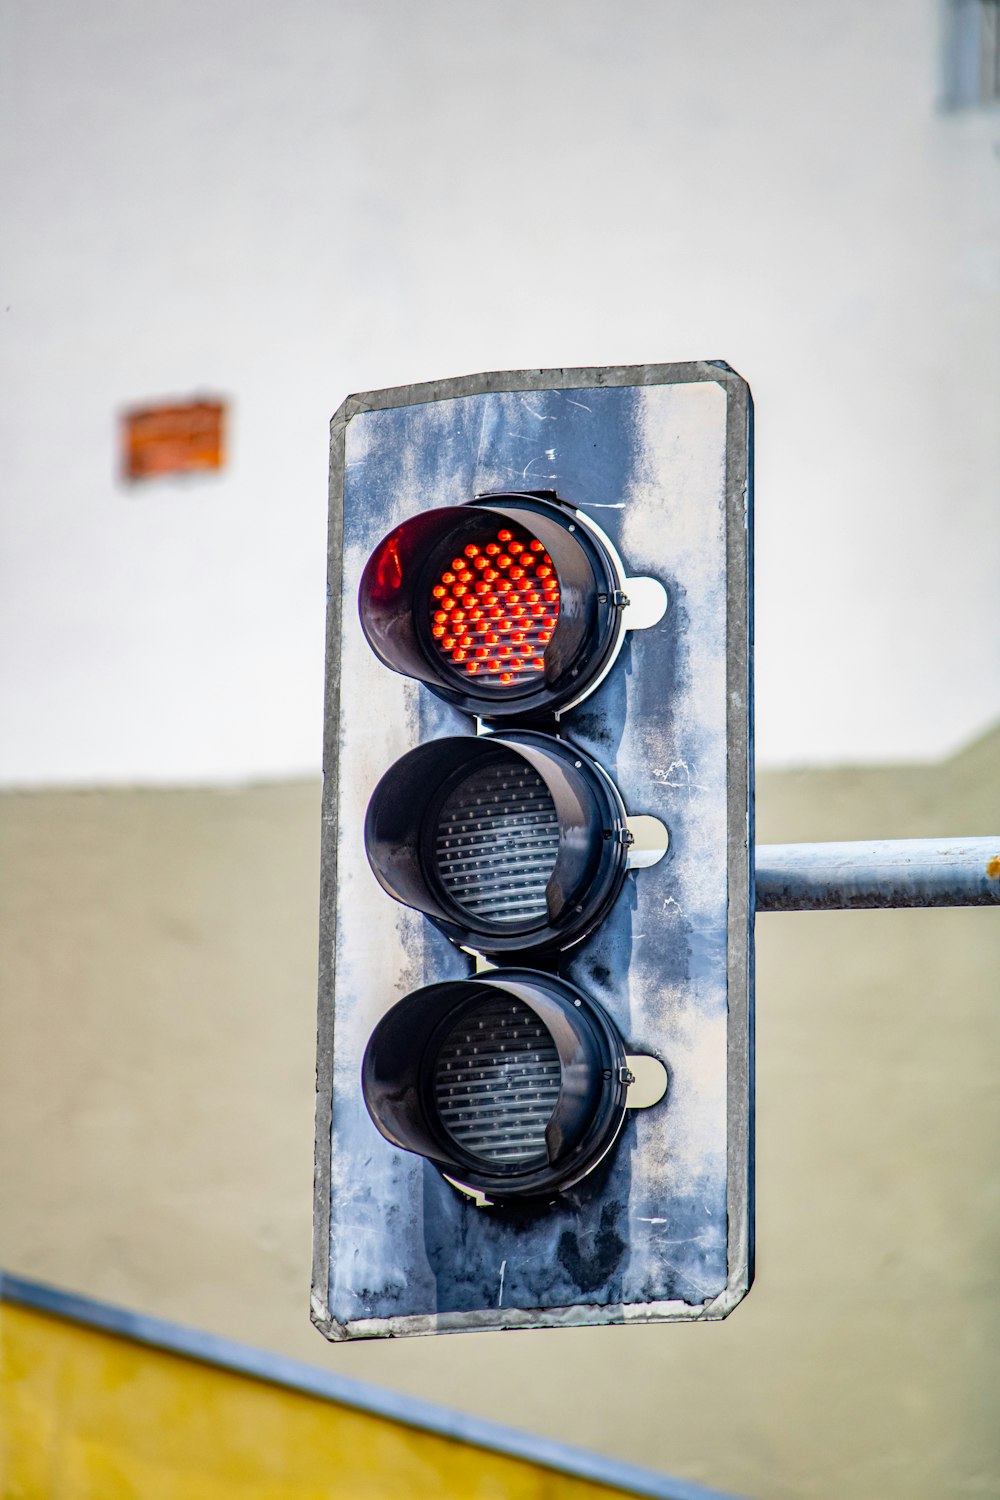 a traffic light showing red